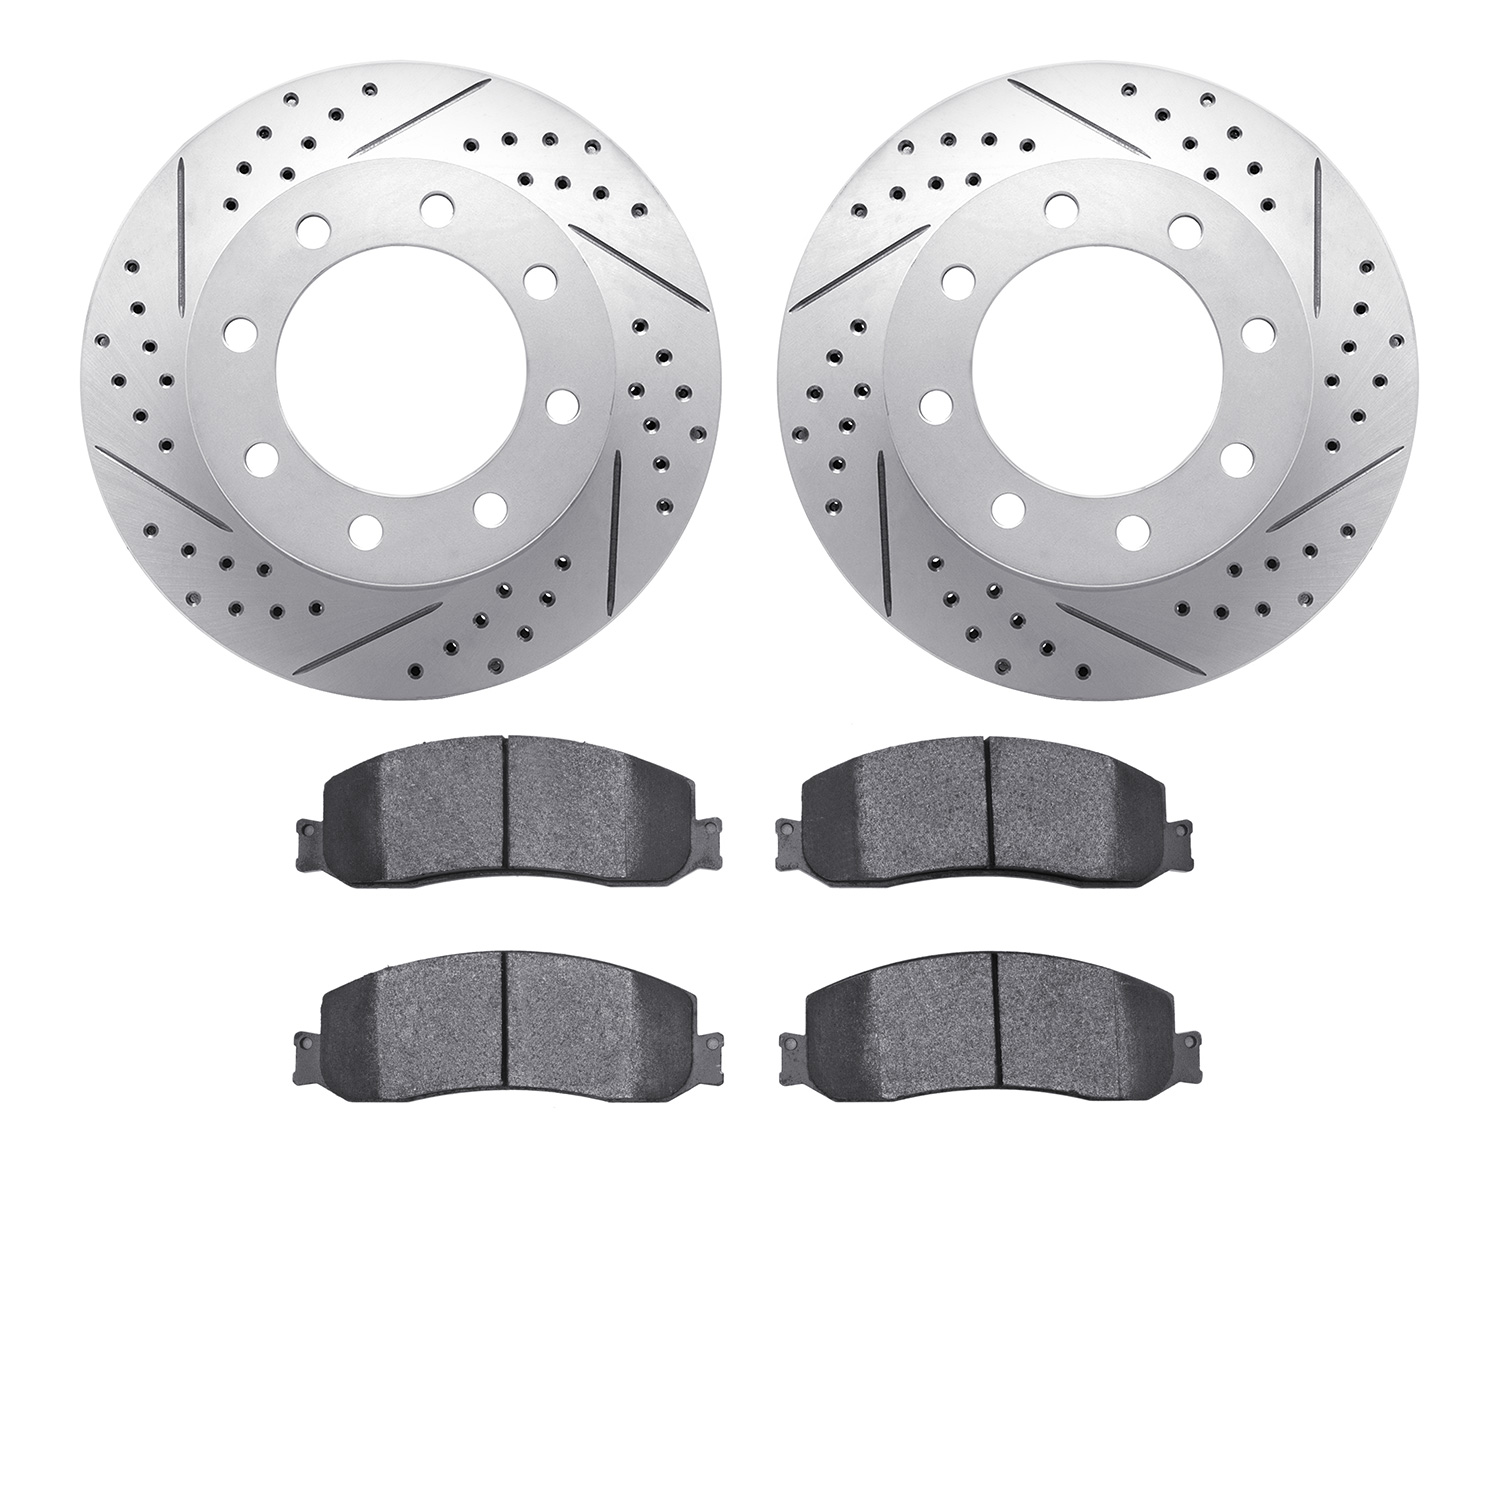 2402-54054 Geoperformance Drilled/Slotted Brake Rotors with Ultimate-Duty Brake Pads Kit, 2010-2012 Ford/Lincoln/Mercury/Mazda,